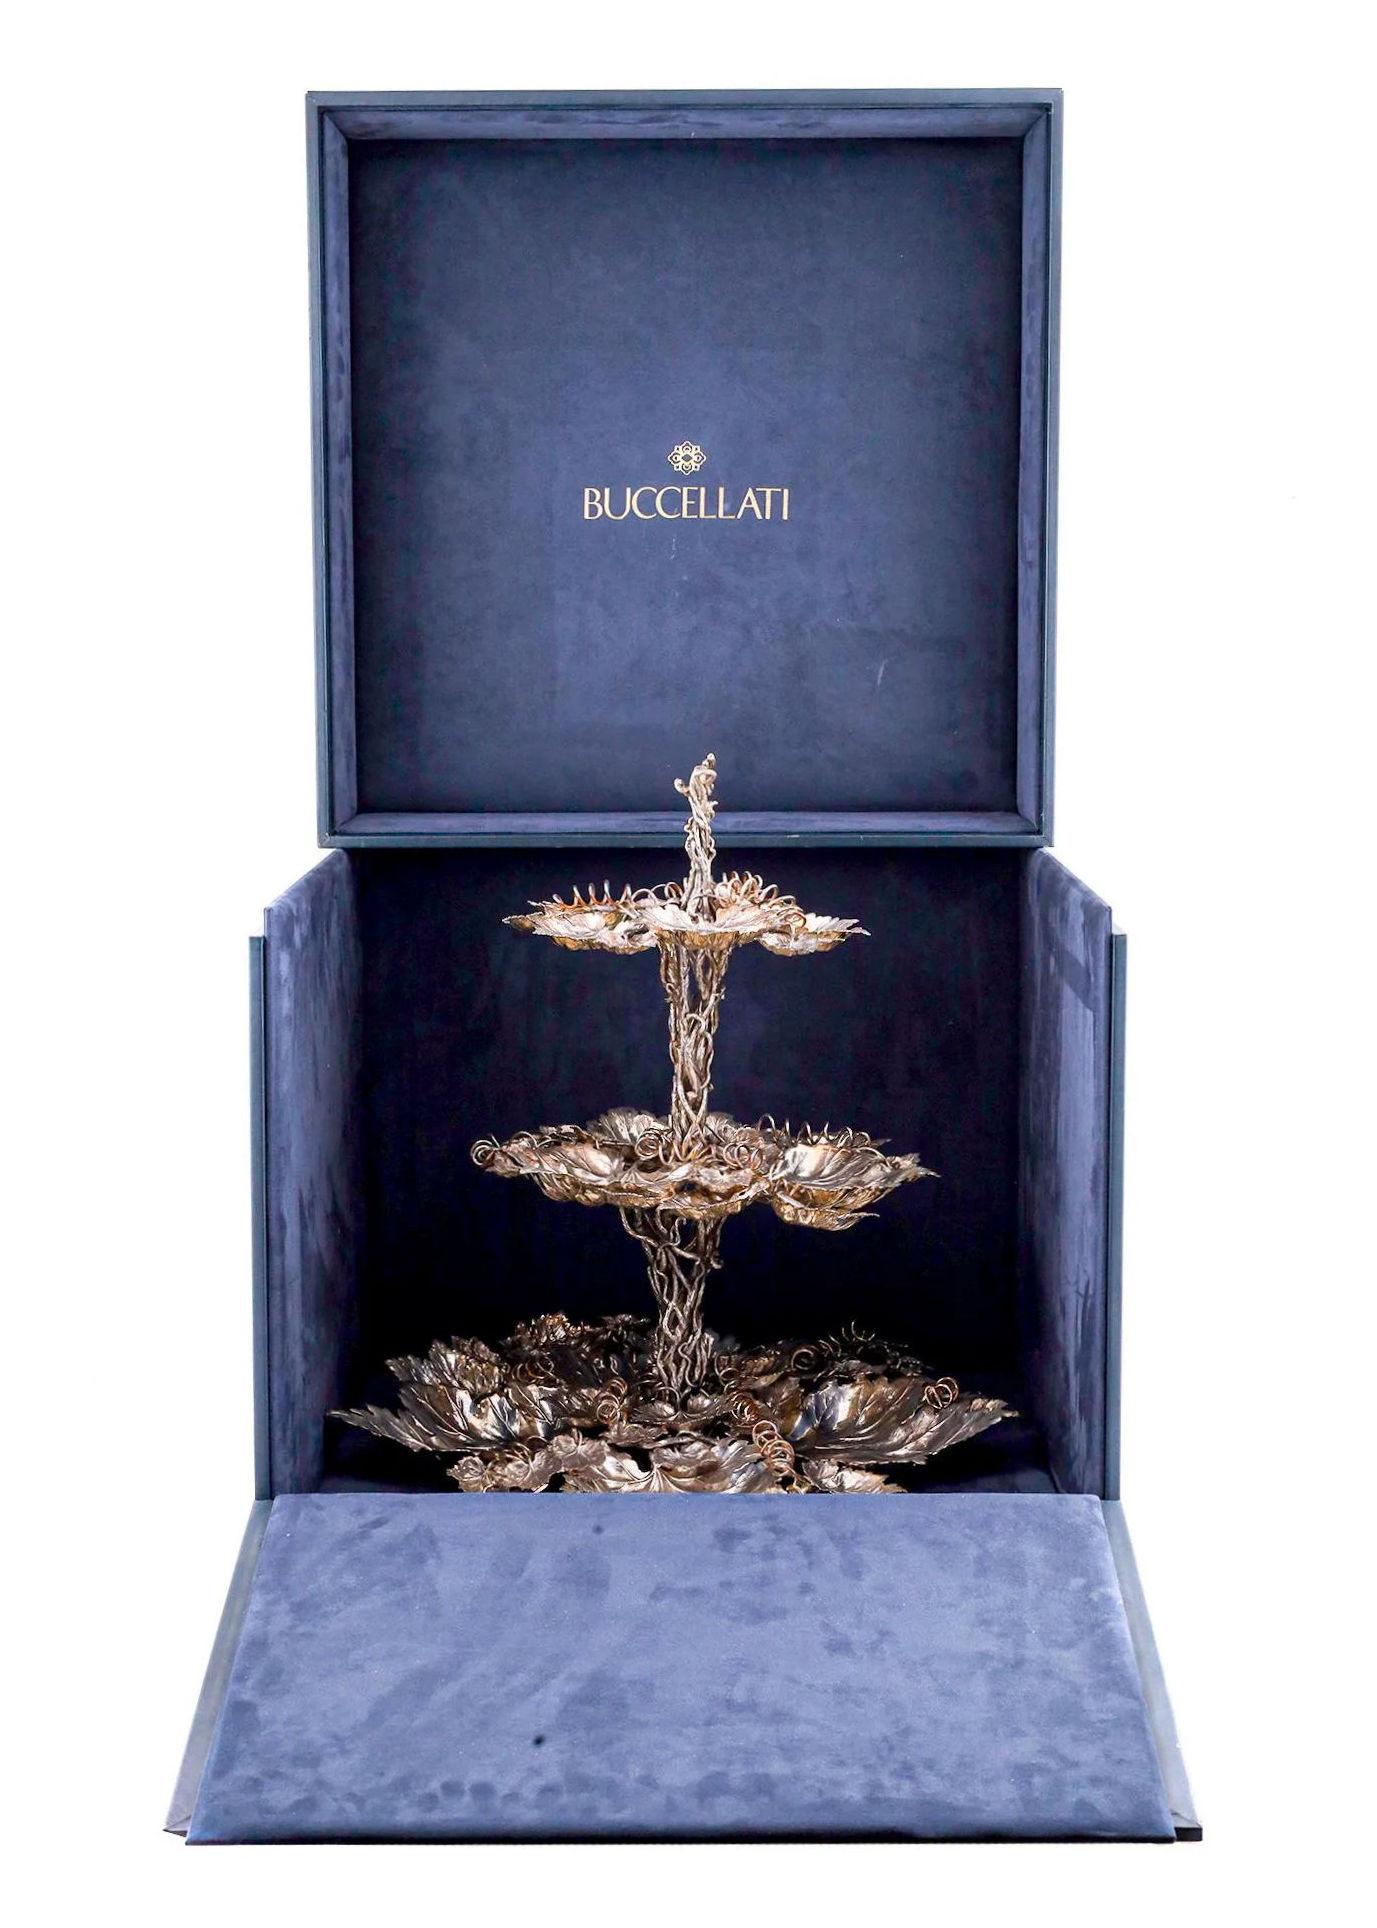 Our vintage centerpiece in sterling silver from Buccellati is composed of three tiers of elaborate grapevines. Marked Buccellati, Italy, Sterling 925, and 763-MI for Mabuti S.r.l. The mark dates the piece from after 1968, and we believe it dates